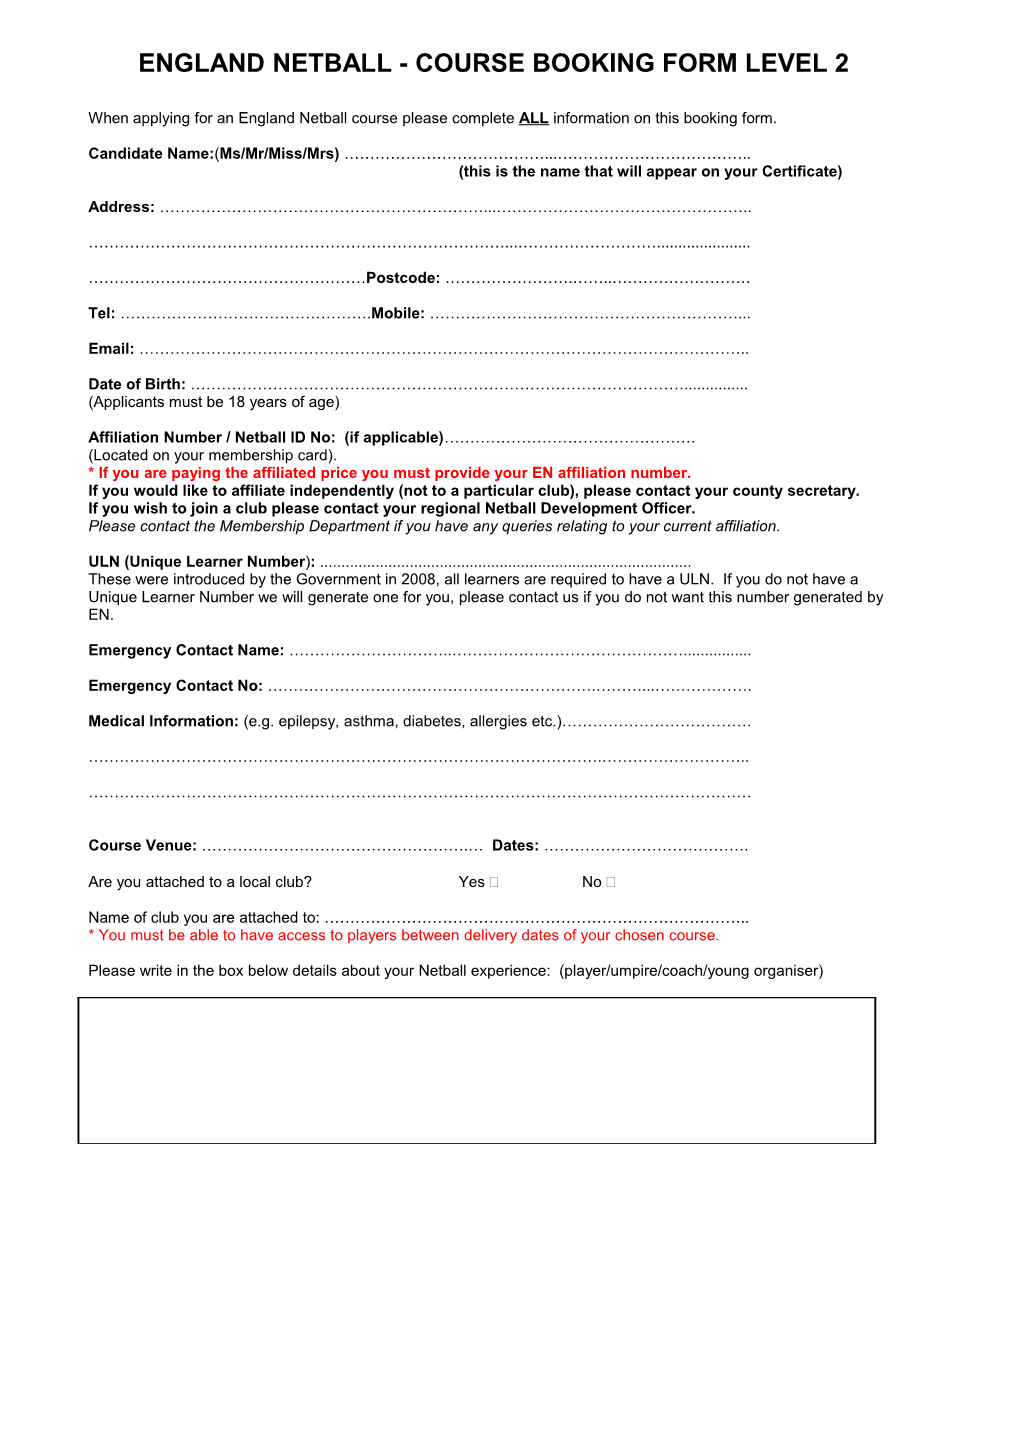 England Netball - Course Booking Form Level 2